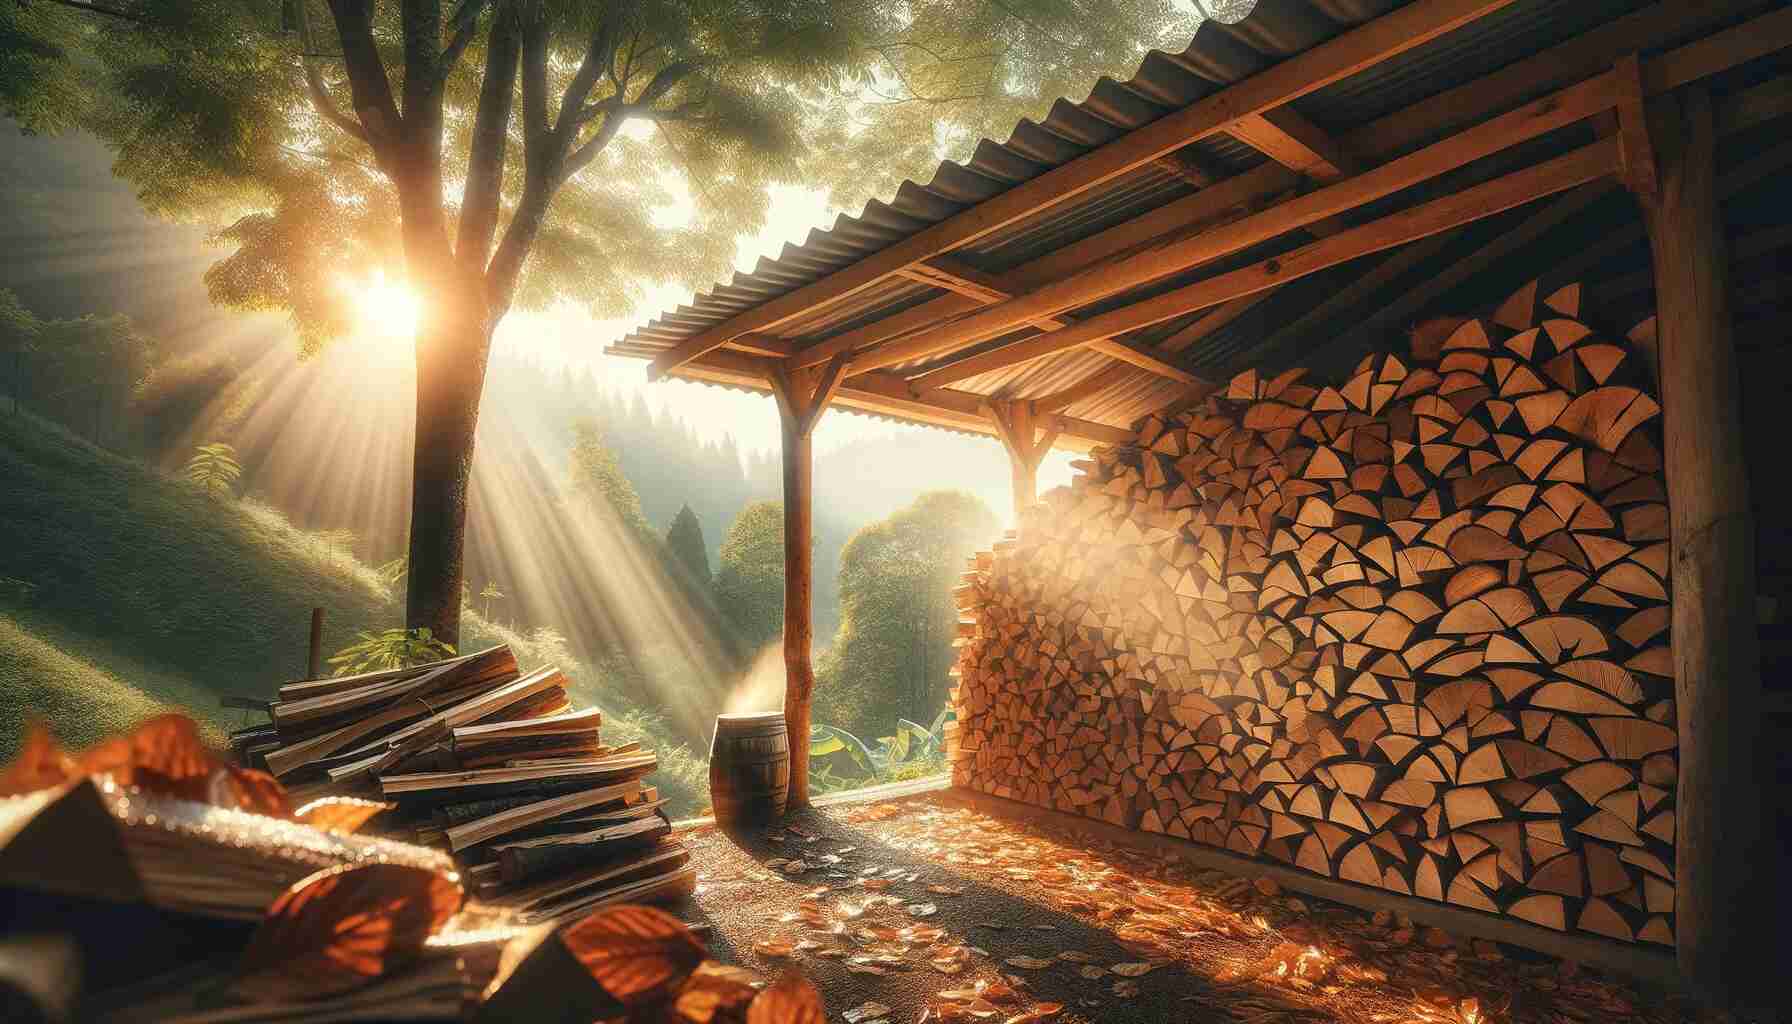 An outdoor scene featuring a neatly stacked pile of firewood under a wooden shelter, with sun rays filtering through the trees of a serene forest background, symbolizing the drying and seasoning process of firewood in autumn.